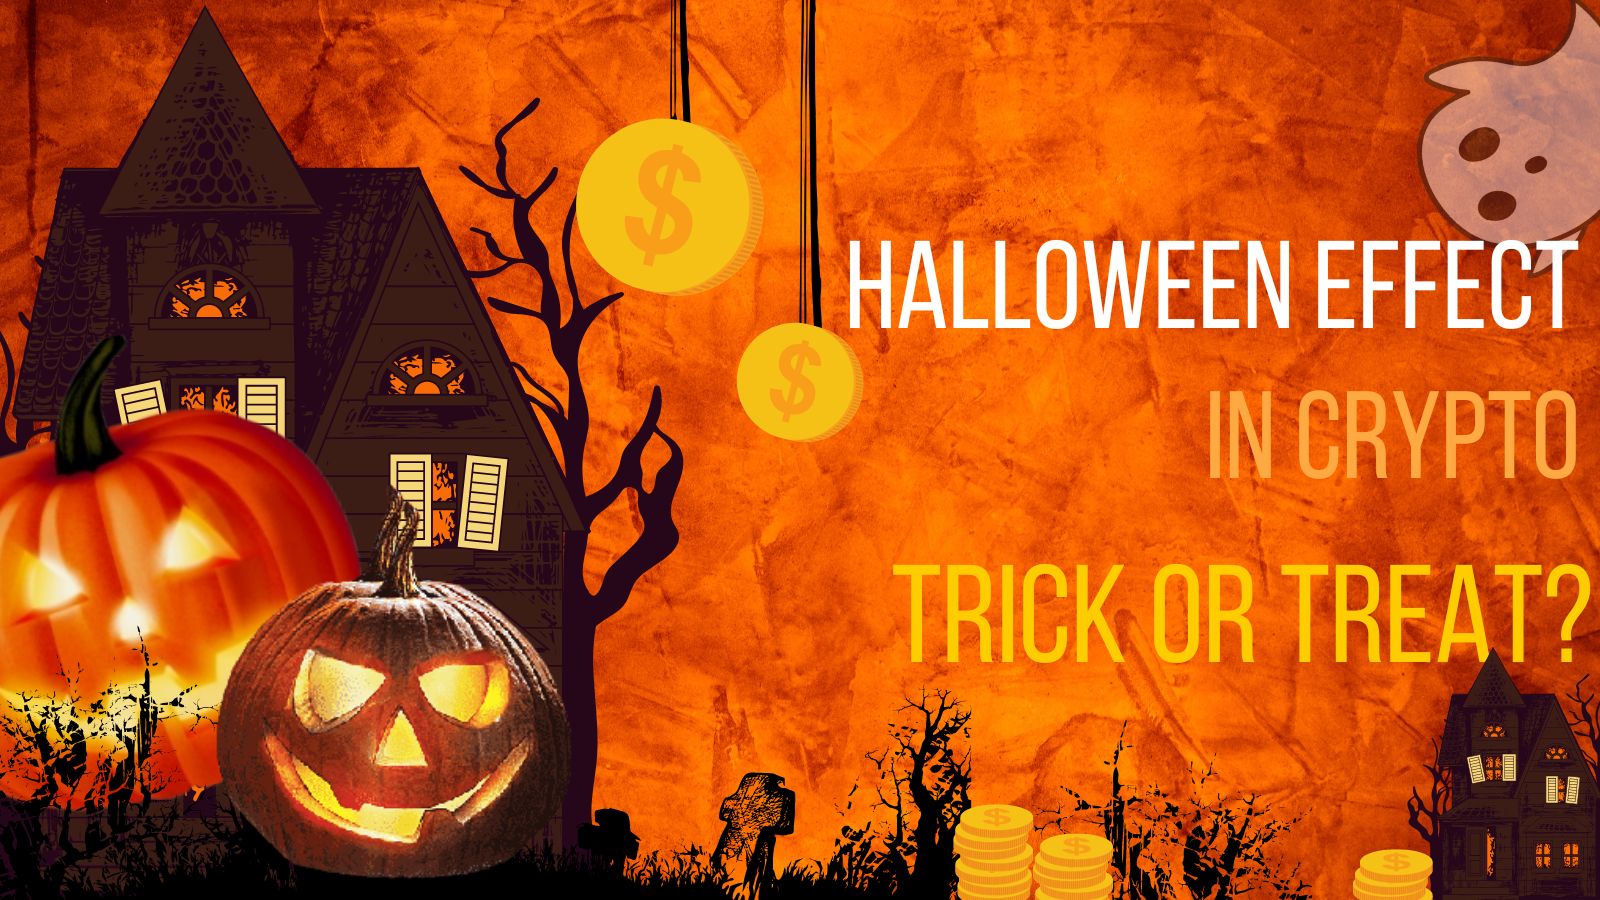 Halloween Effect In Crypto - Trick or Treat-84ce0fa2